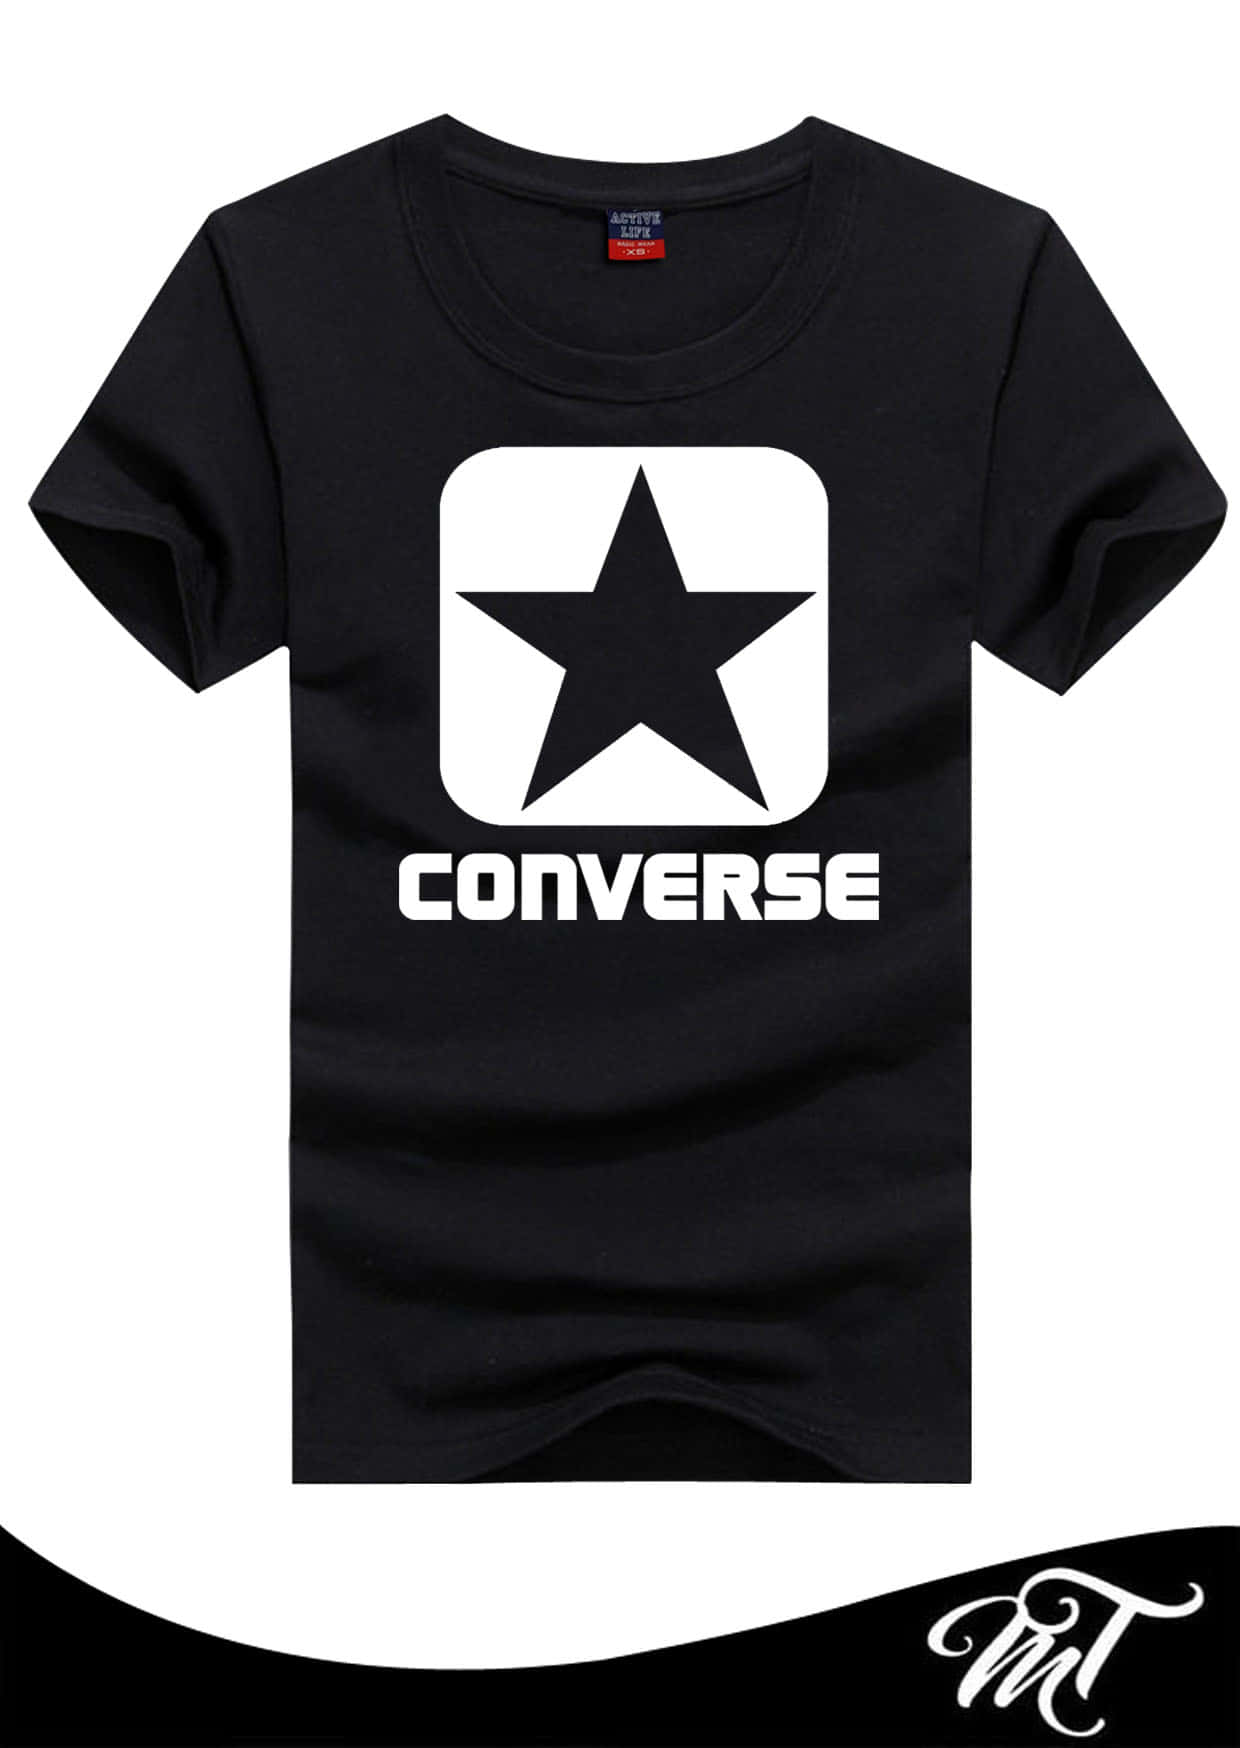 Make a powerful statement in Converse shoes.